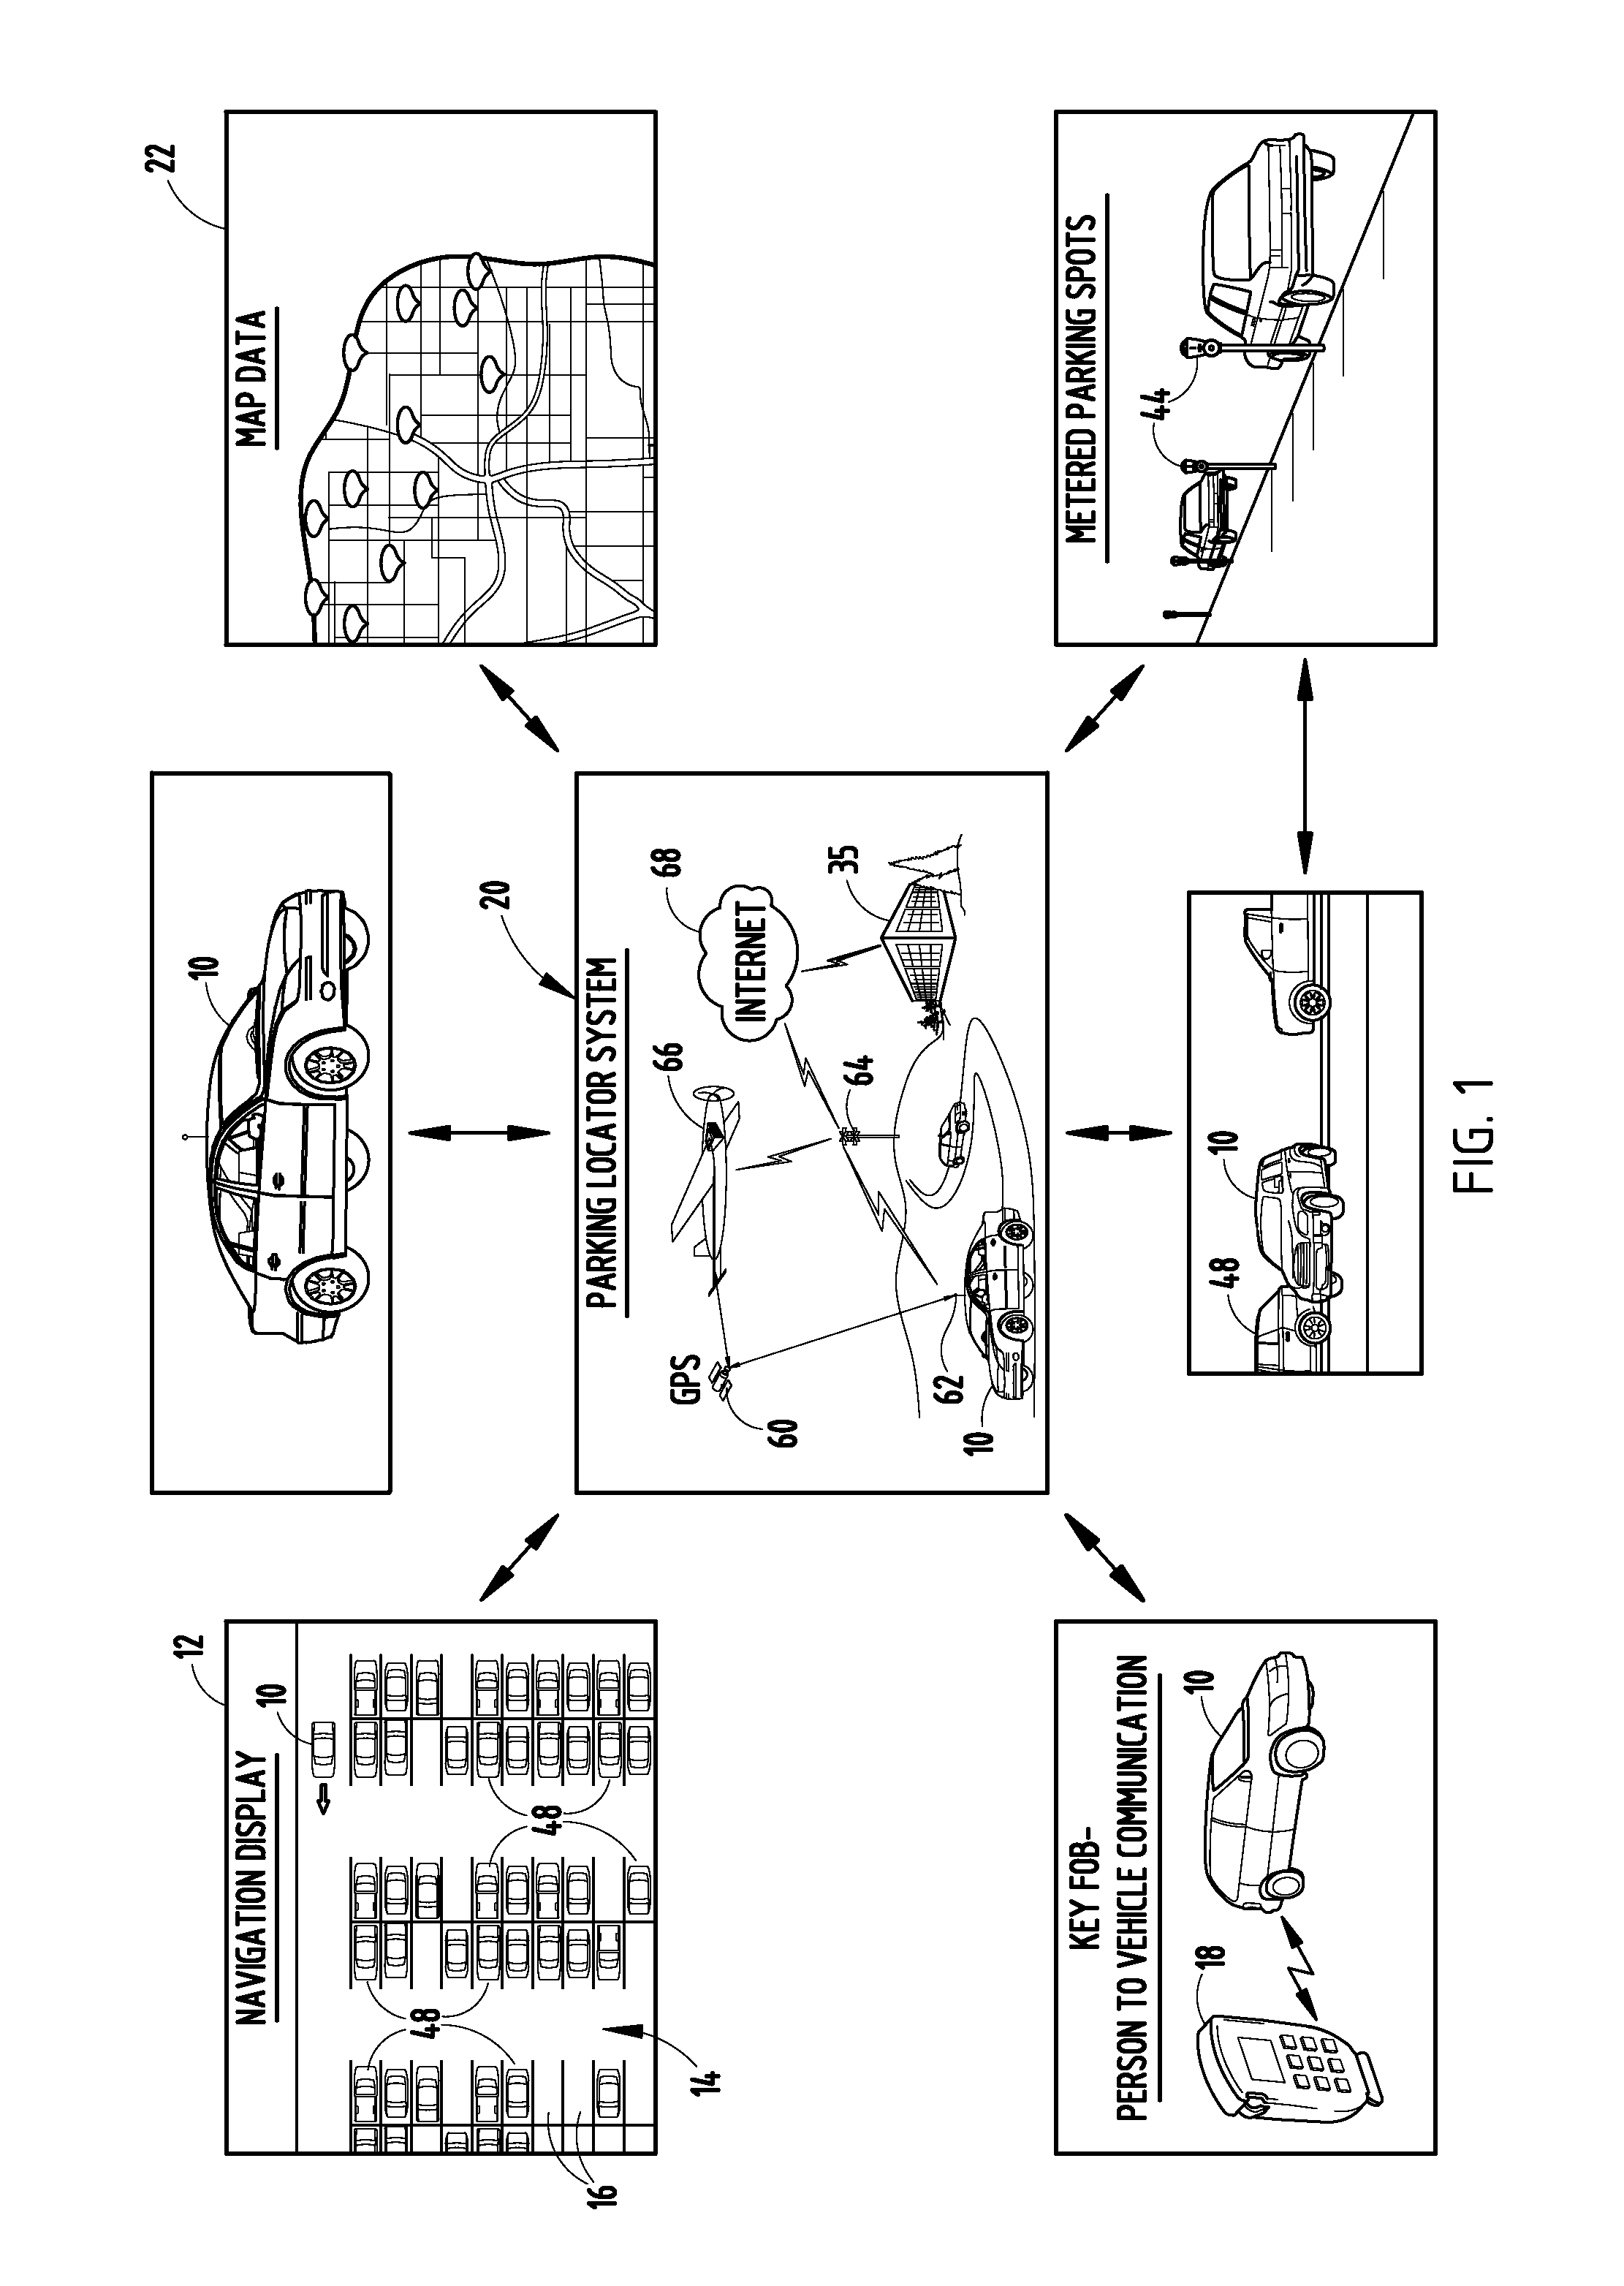 Vehicle parking locator system and method using connected vehicles